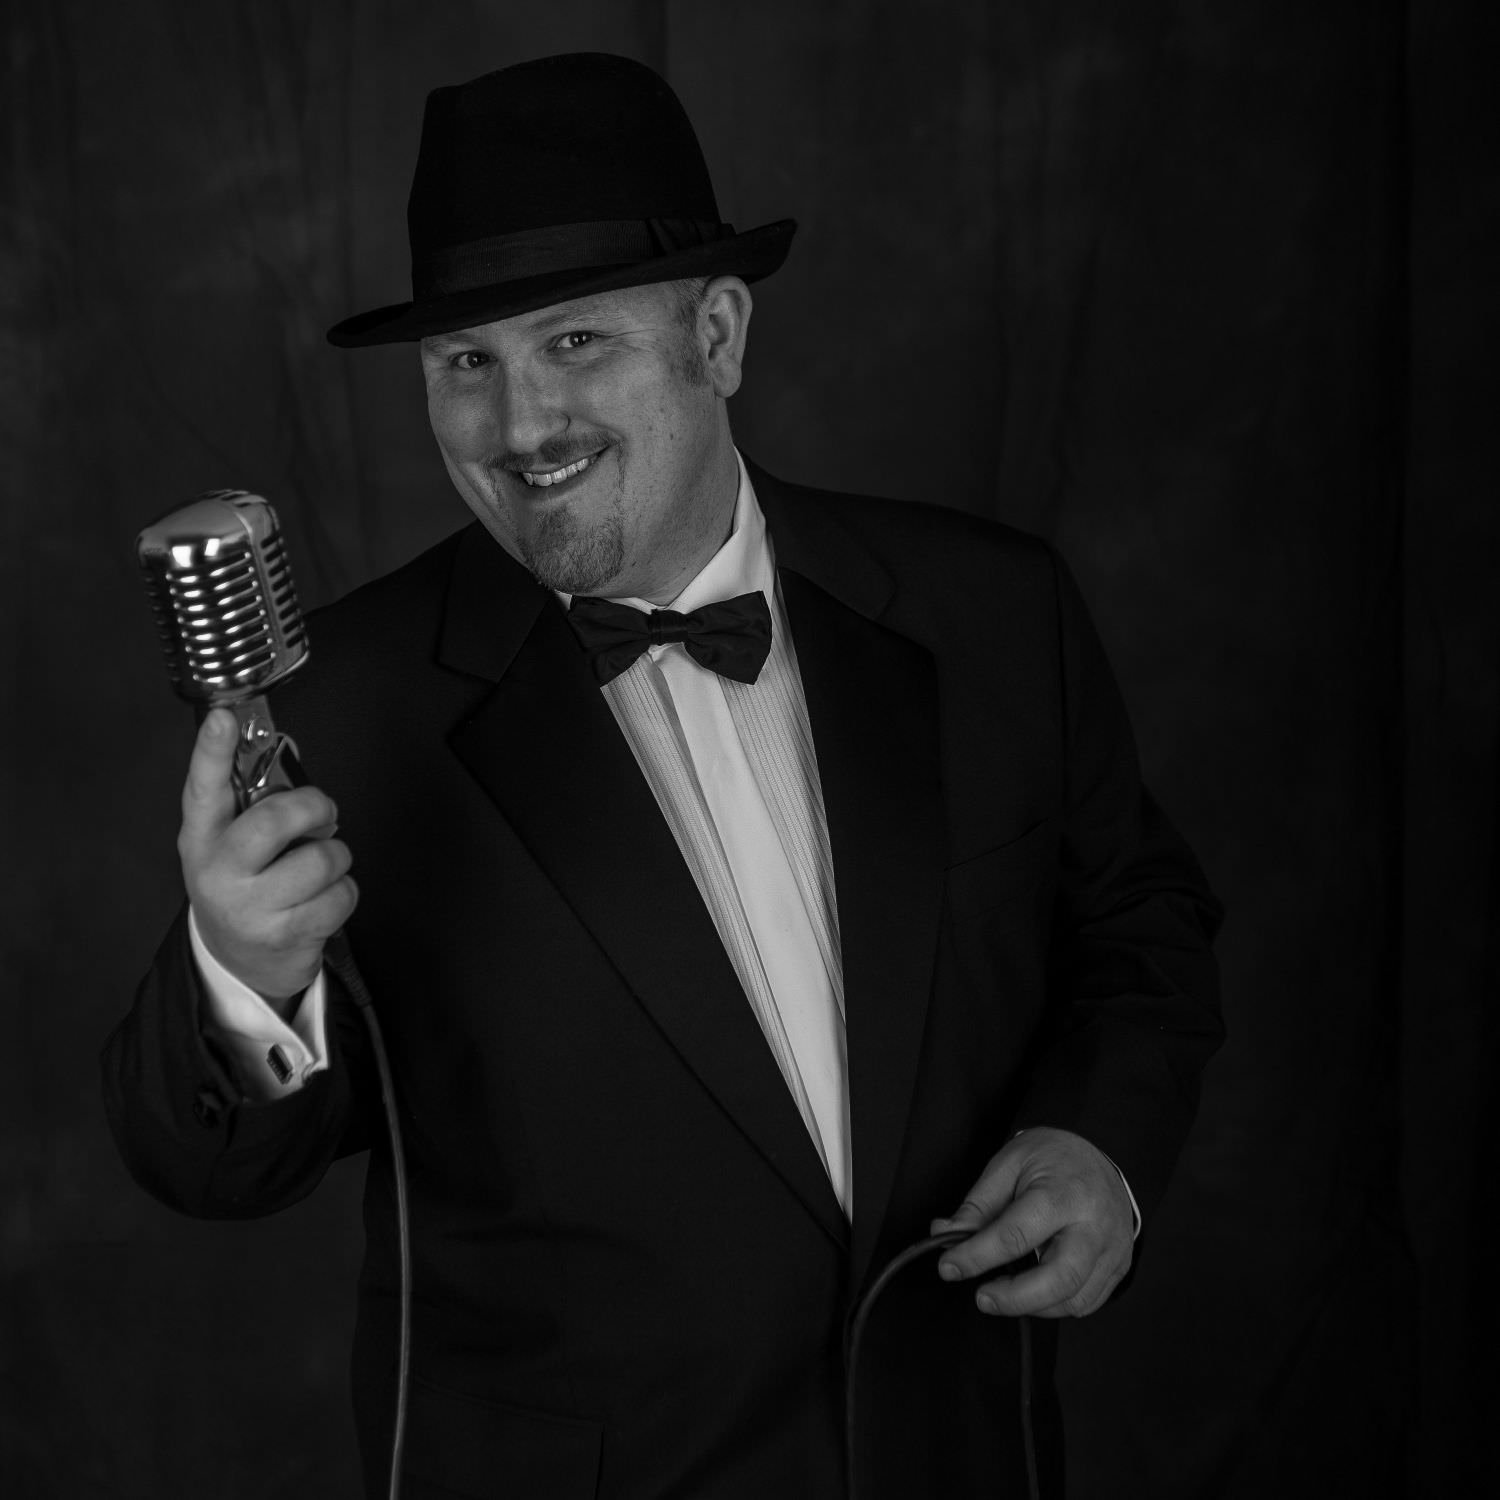 A smiling Jon paul rat pack singer in trilby hat and tuxedo with bow tie holds up 1950s microphone.